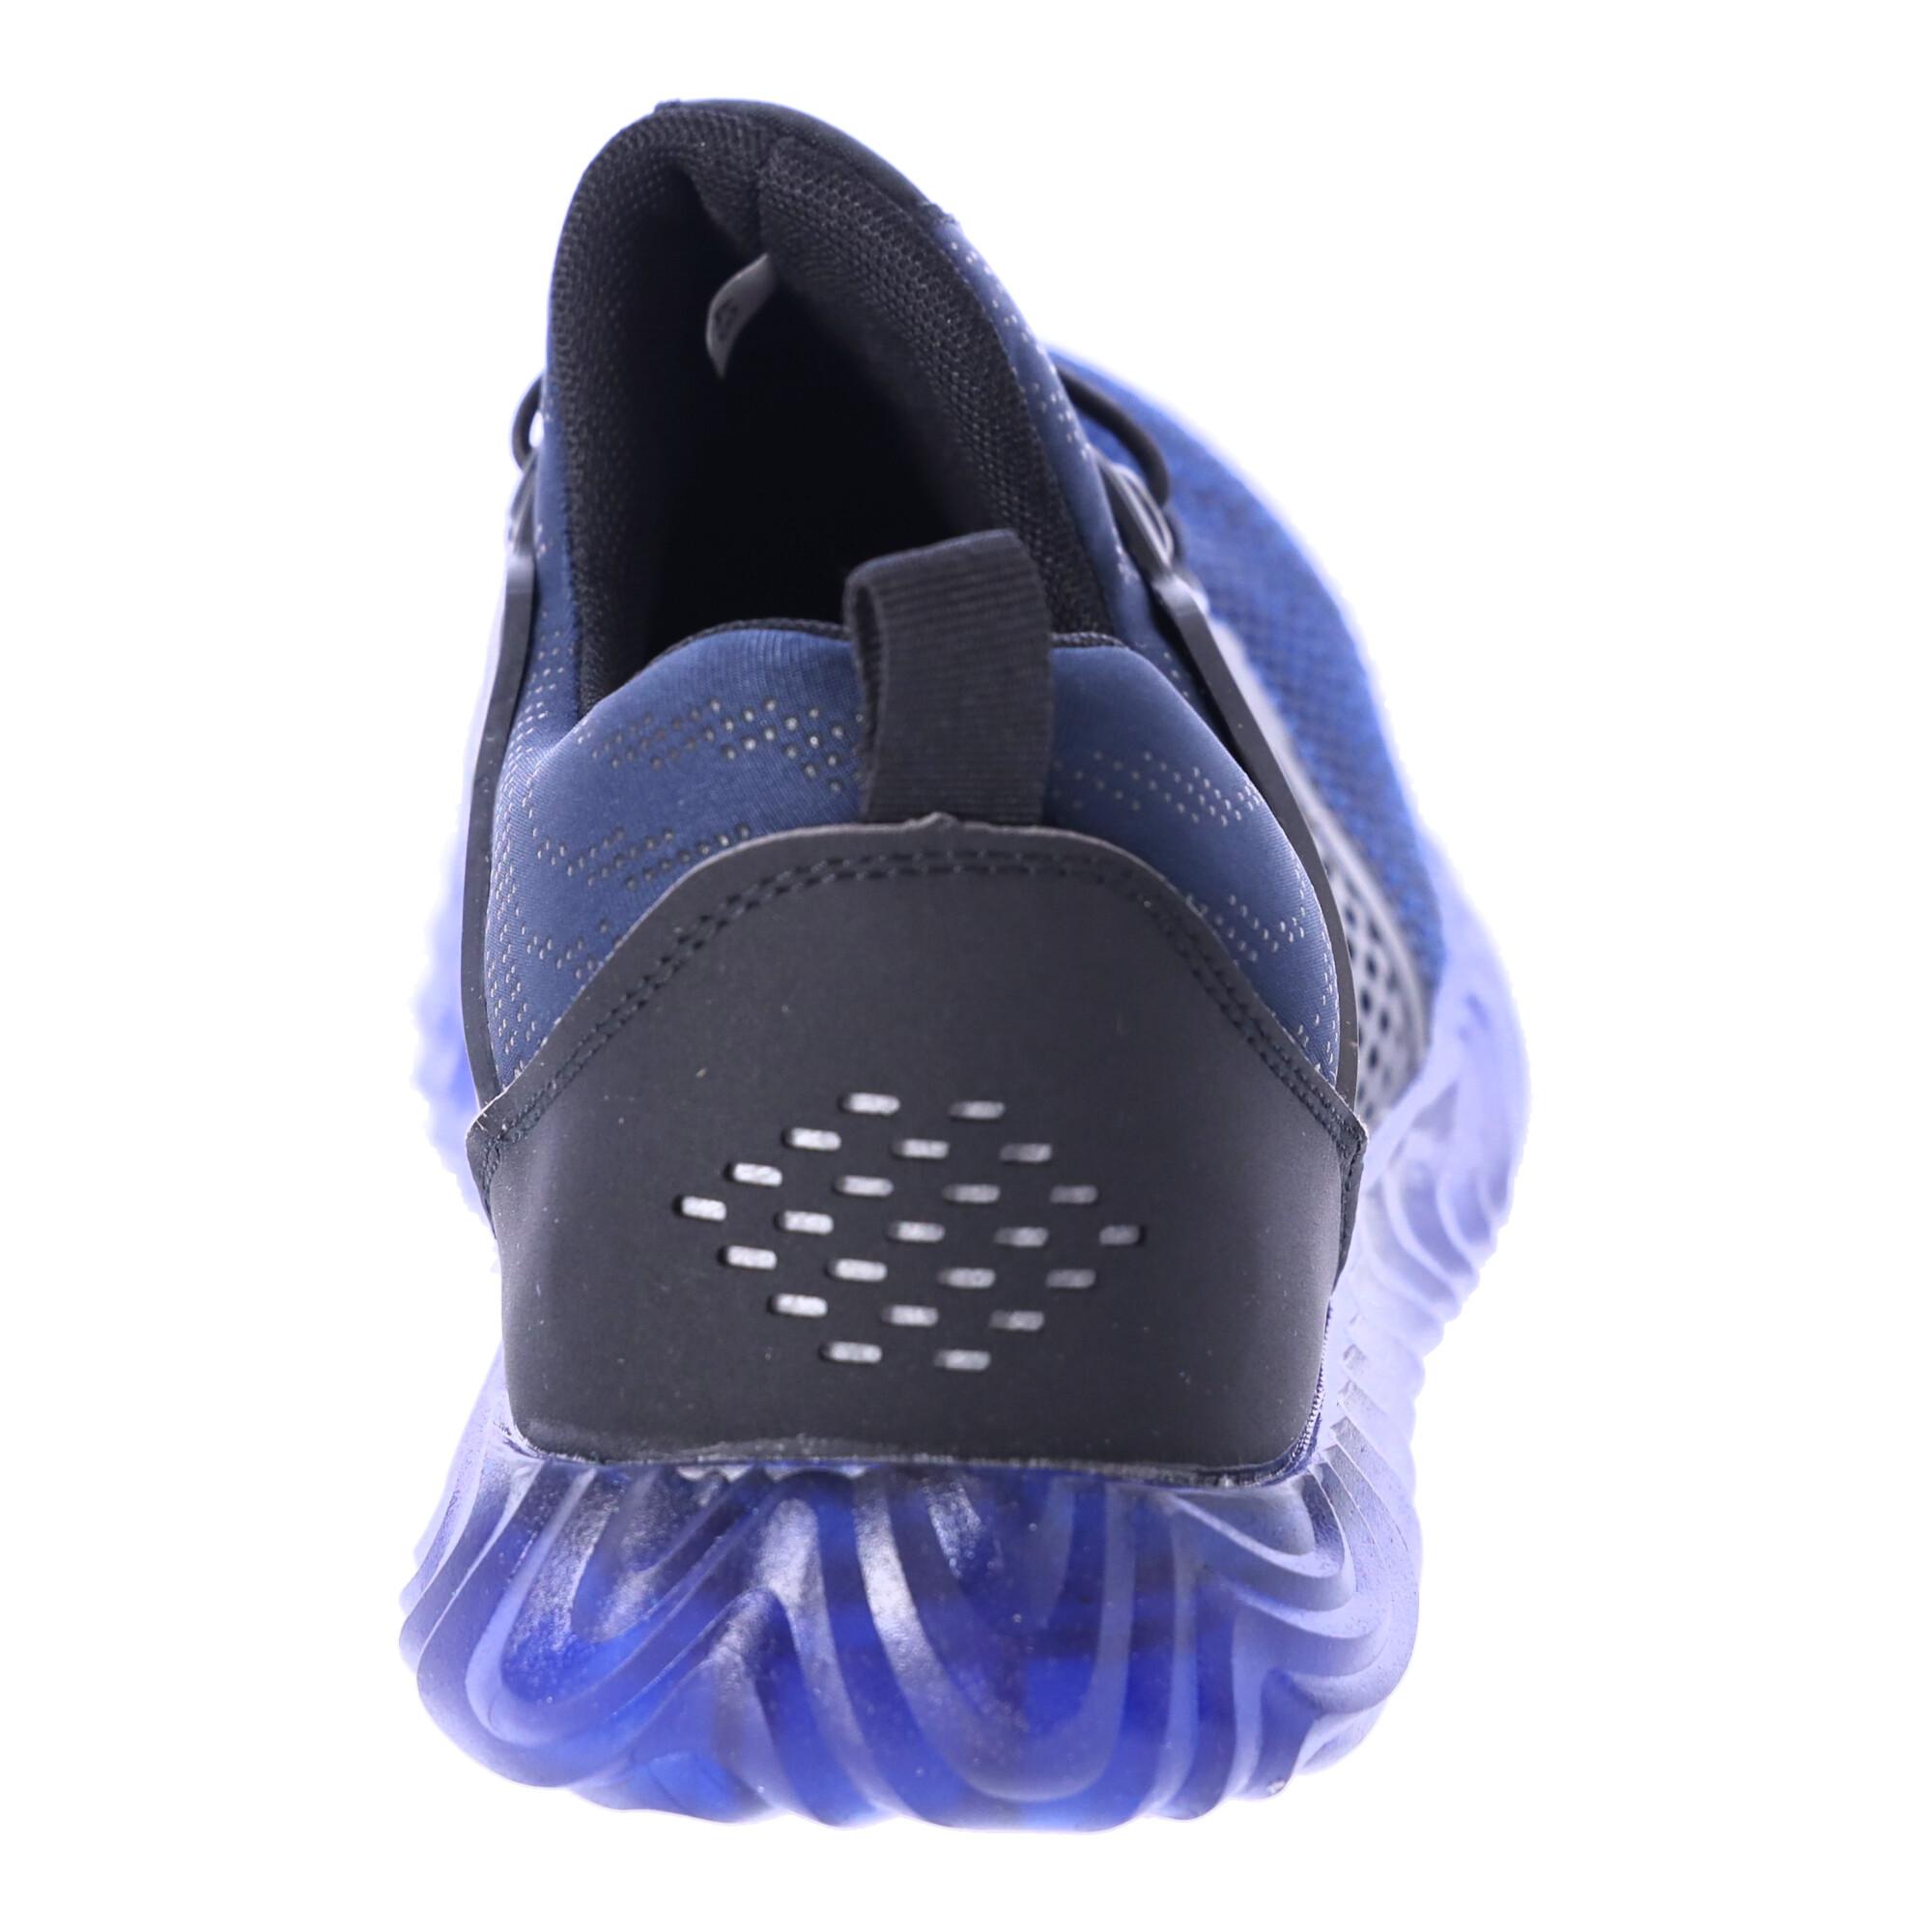 Work safety shoes "44" - navy blue